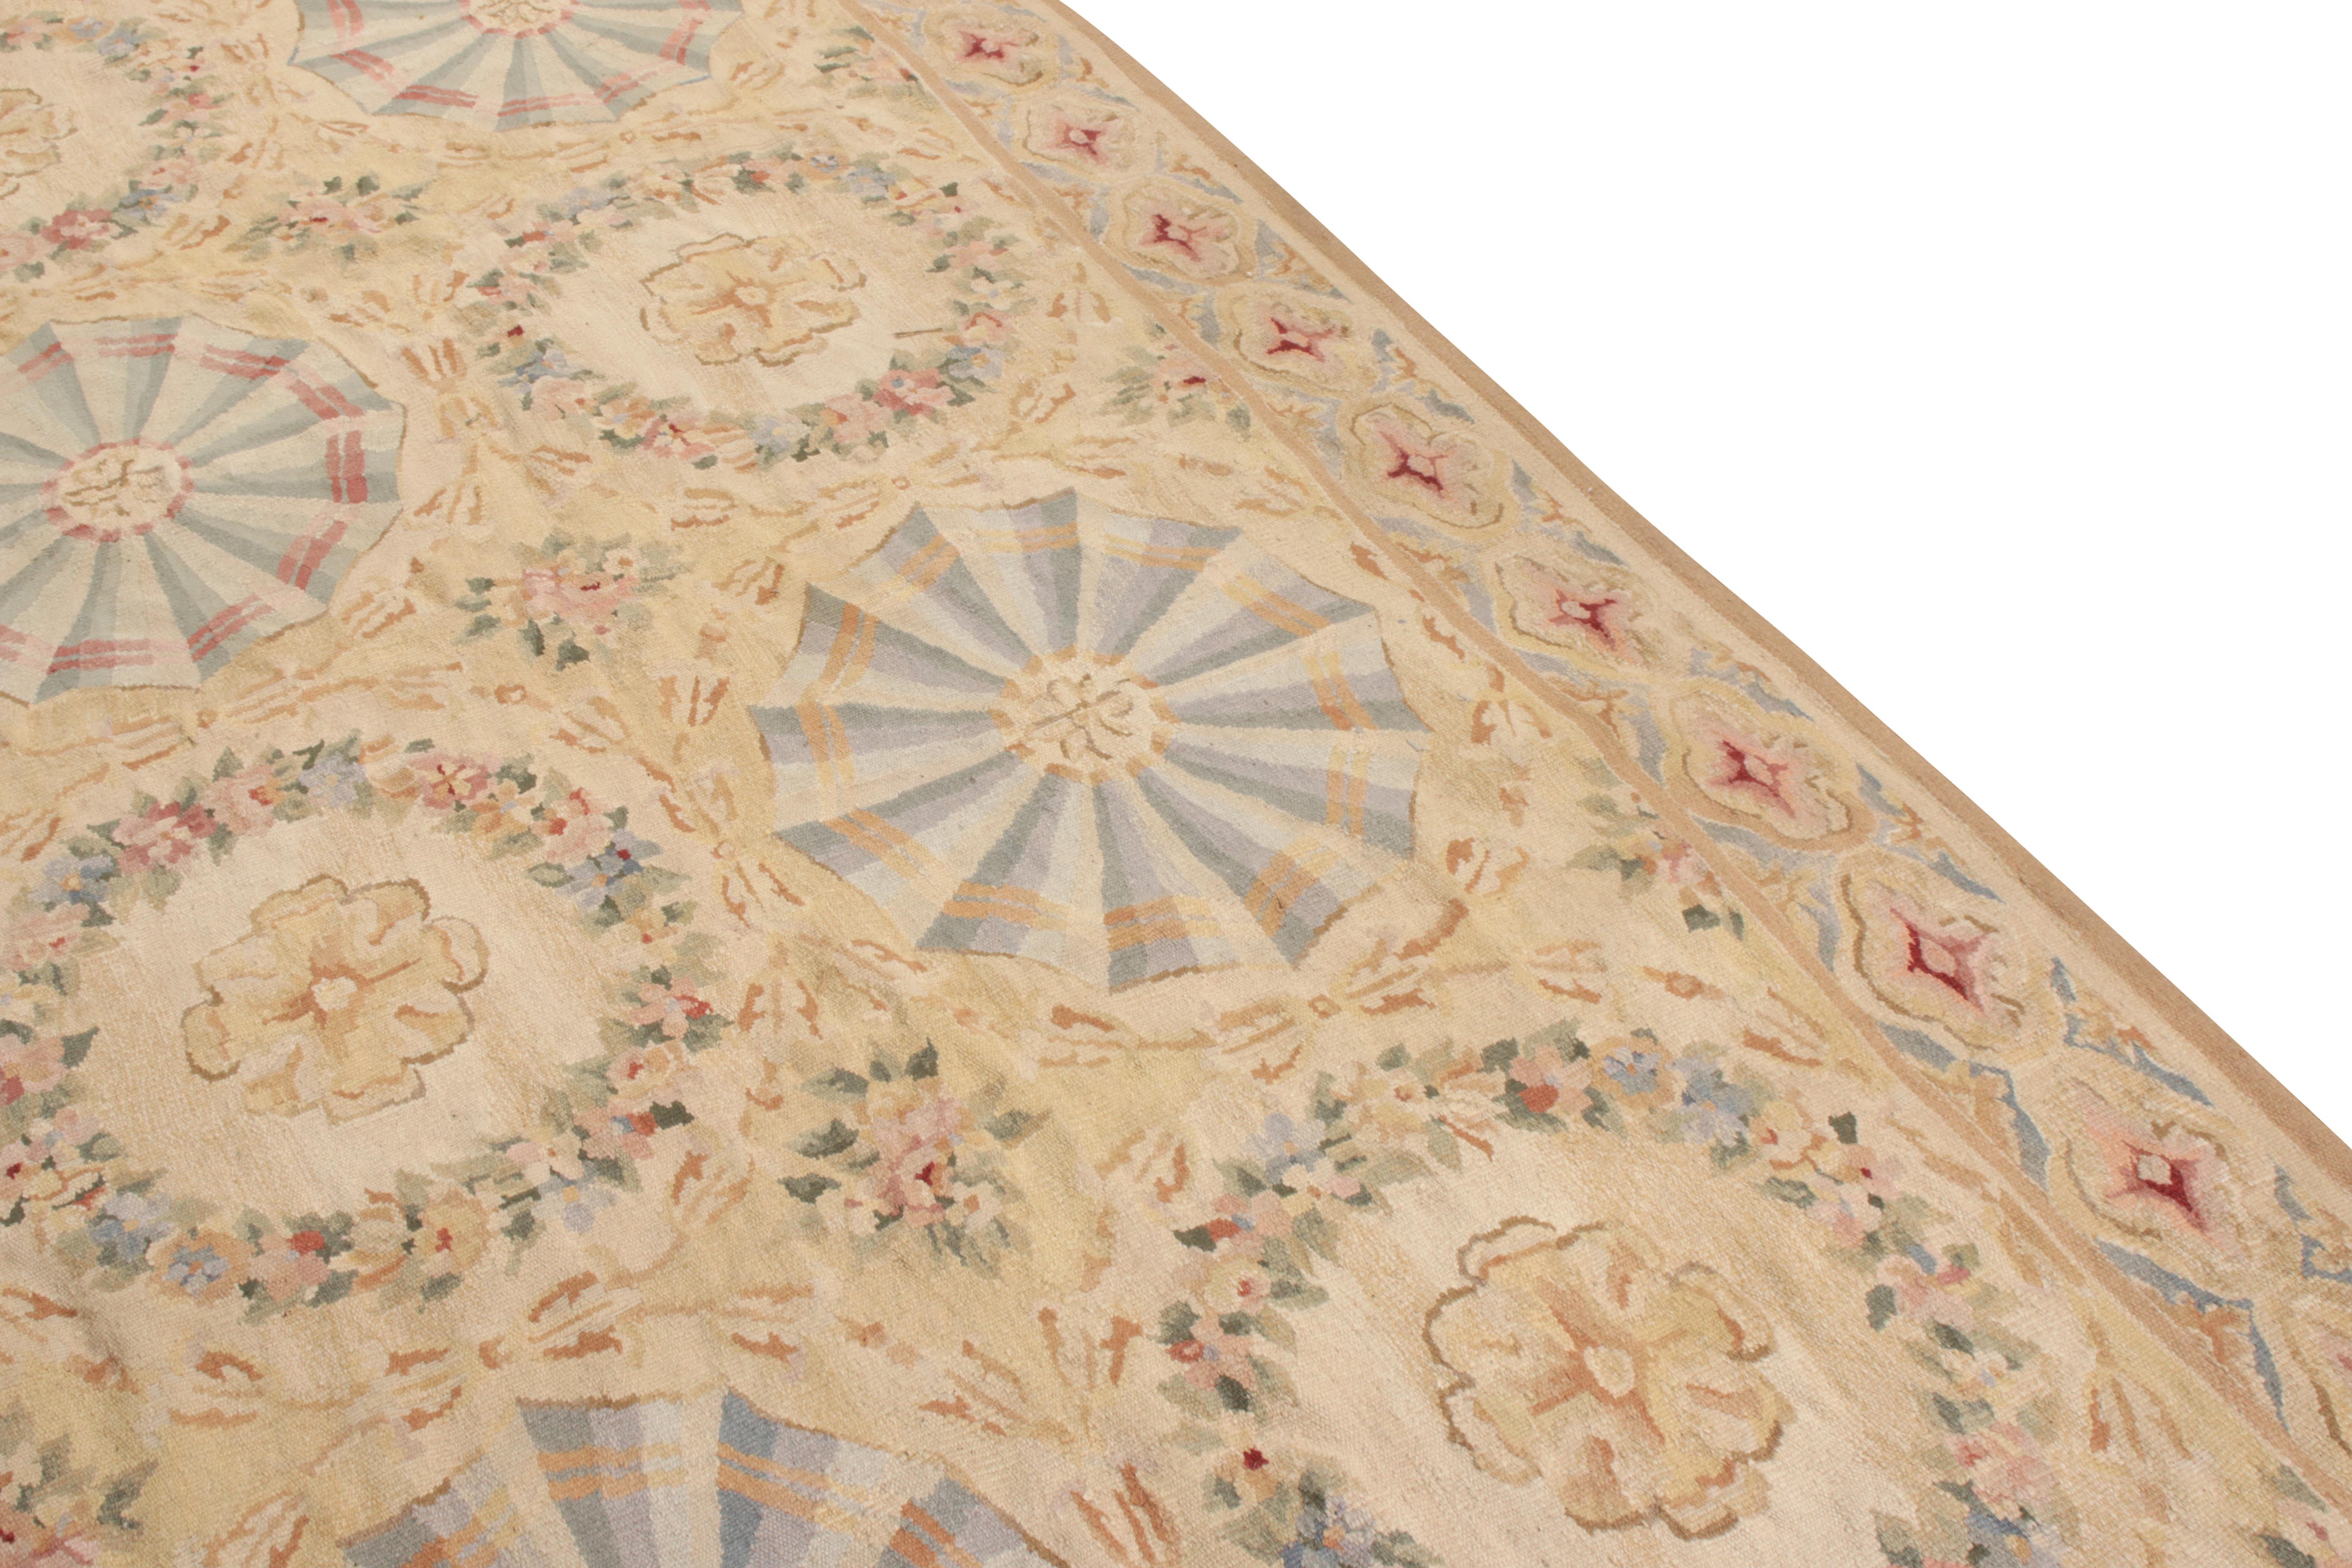 Hand-Woven Rug & Kilim's Aubusson Style Flat-Weave Rug in Beige Gold Floral Pattern